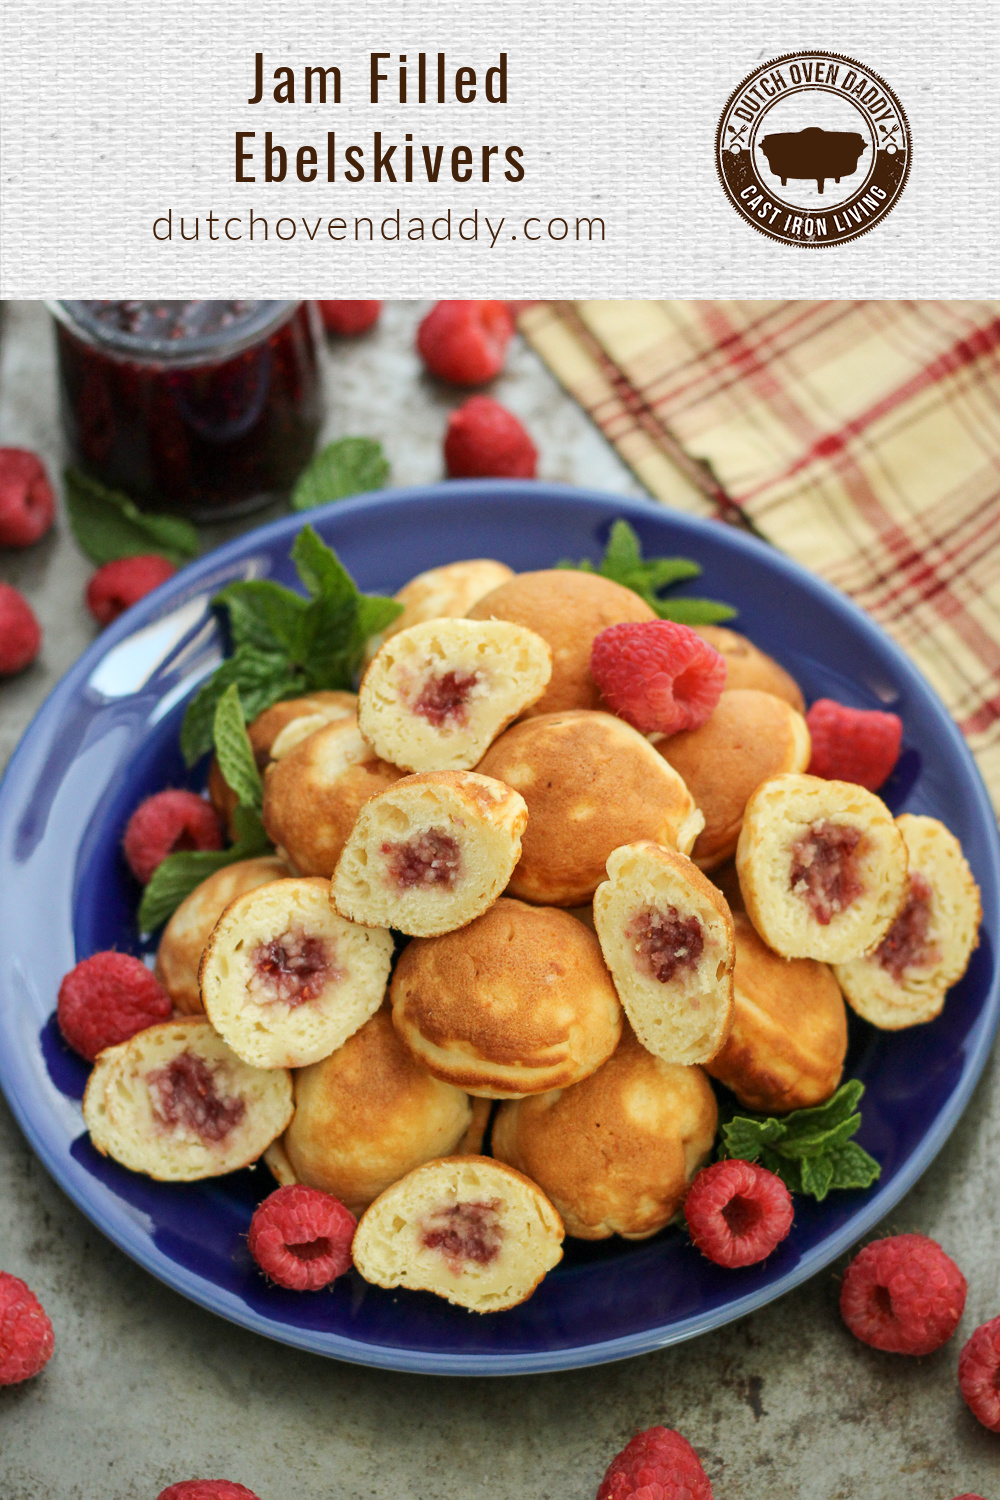 Branded image of Jam Filled Ebelskivers or aebleskivers on a blue plate garnished with fresh raspberries and mint.